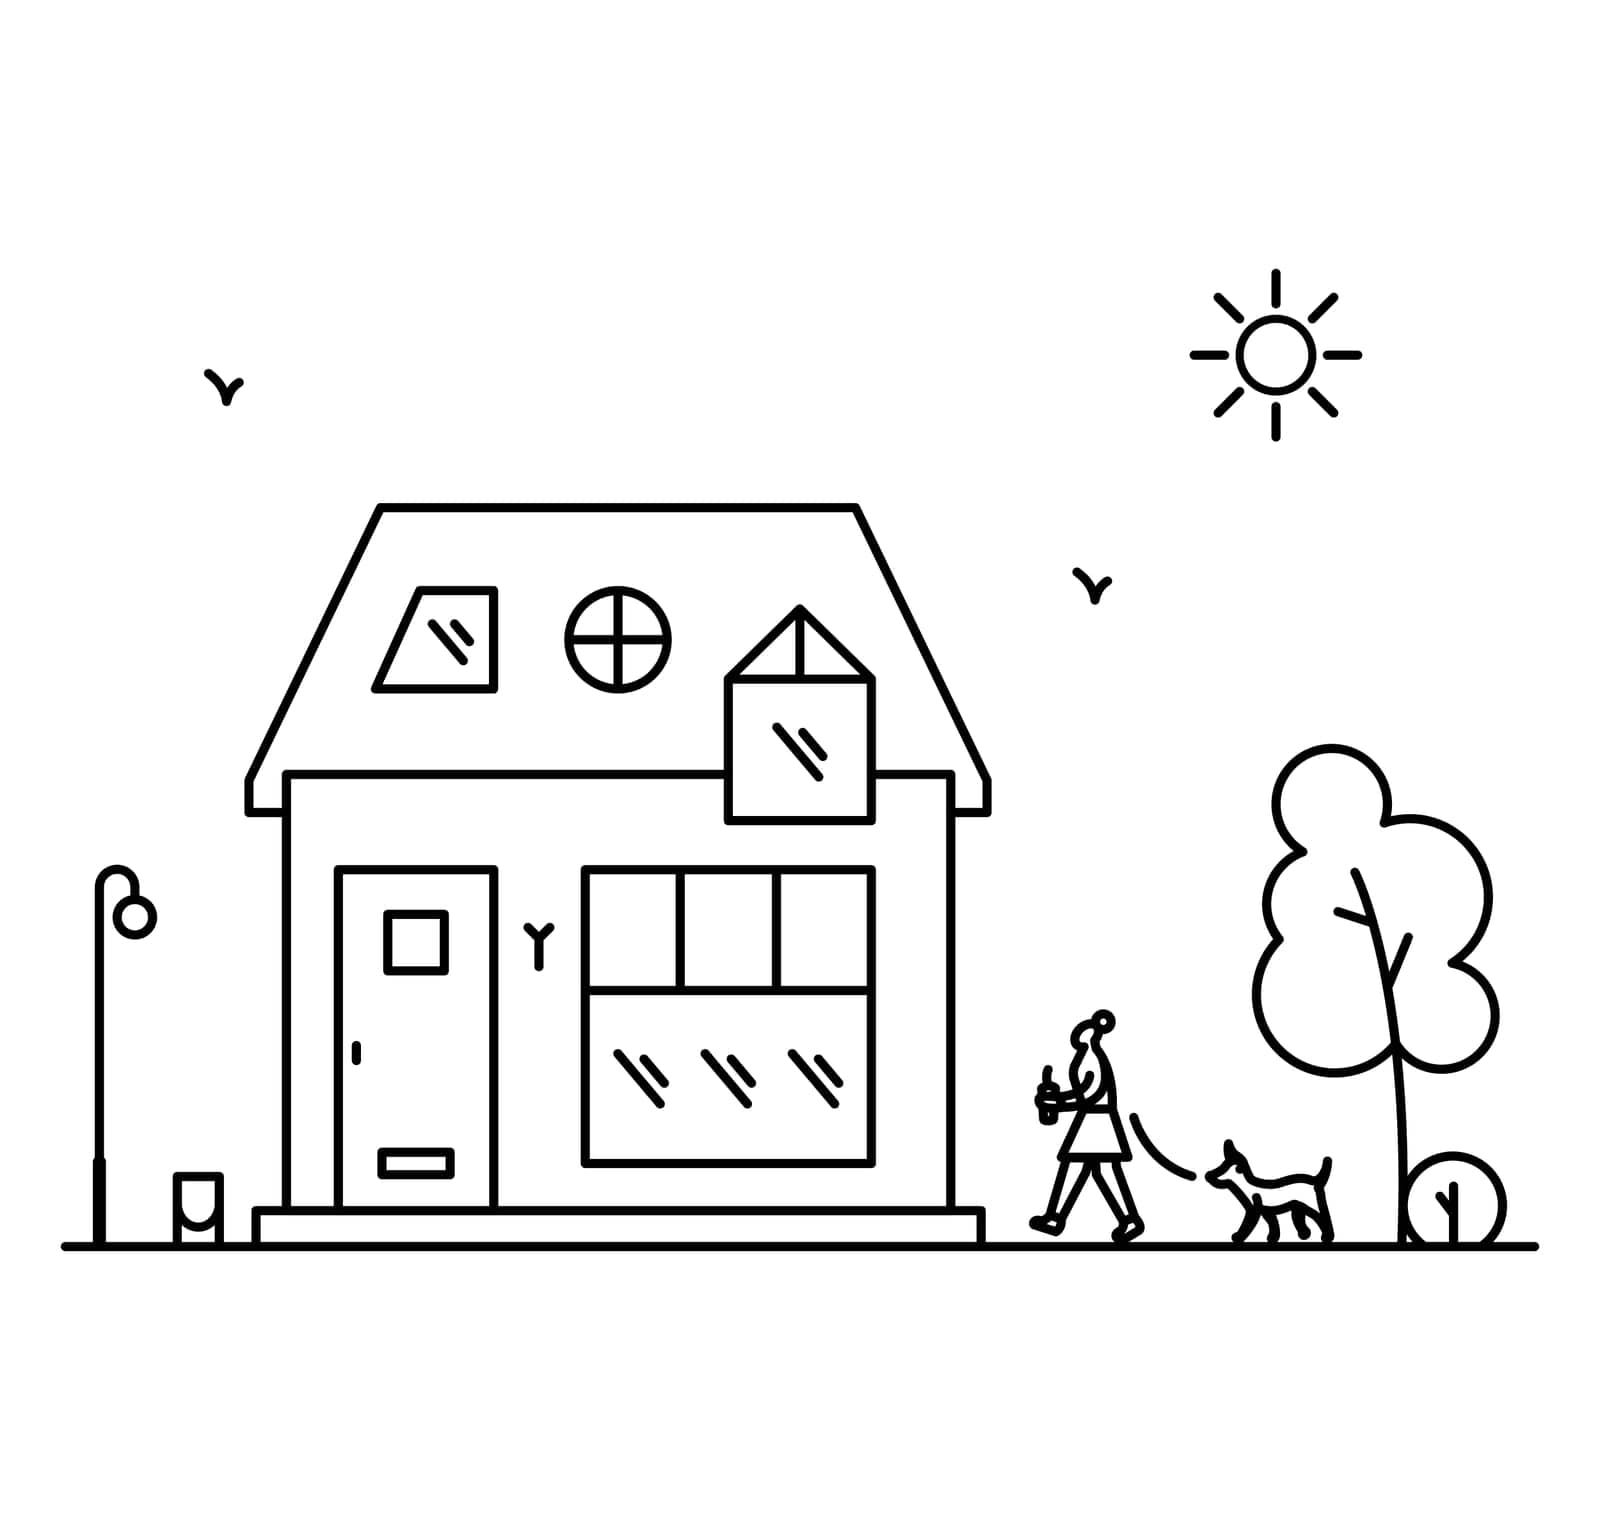 Neighborhood line art picture. Woman walking with the dog.